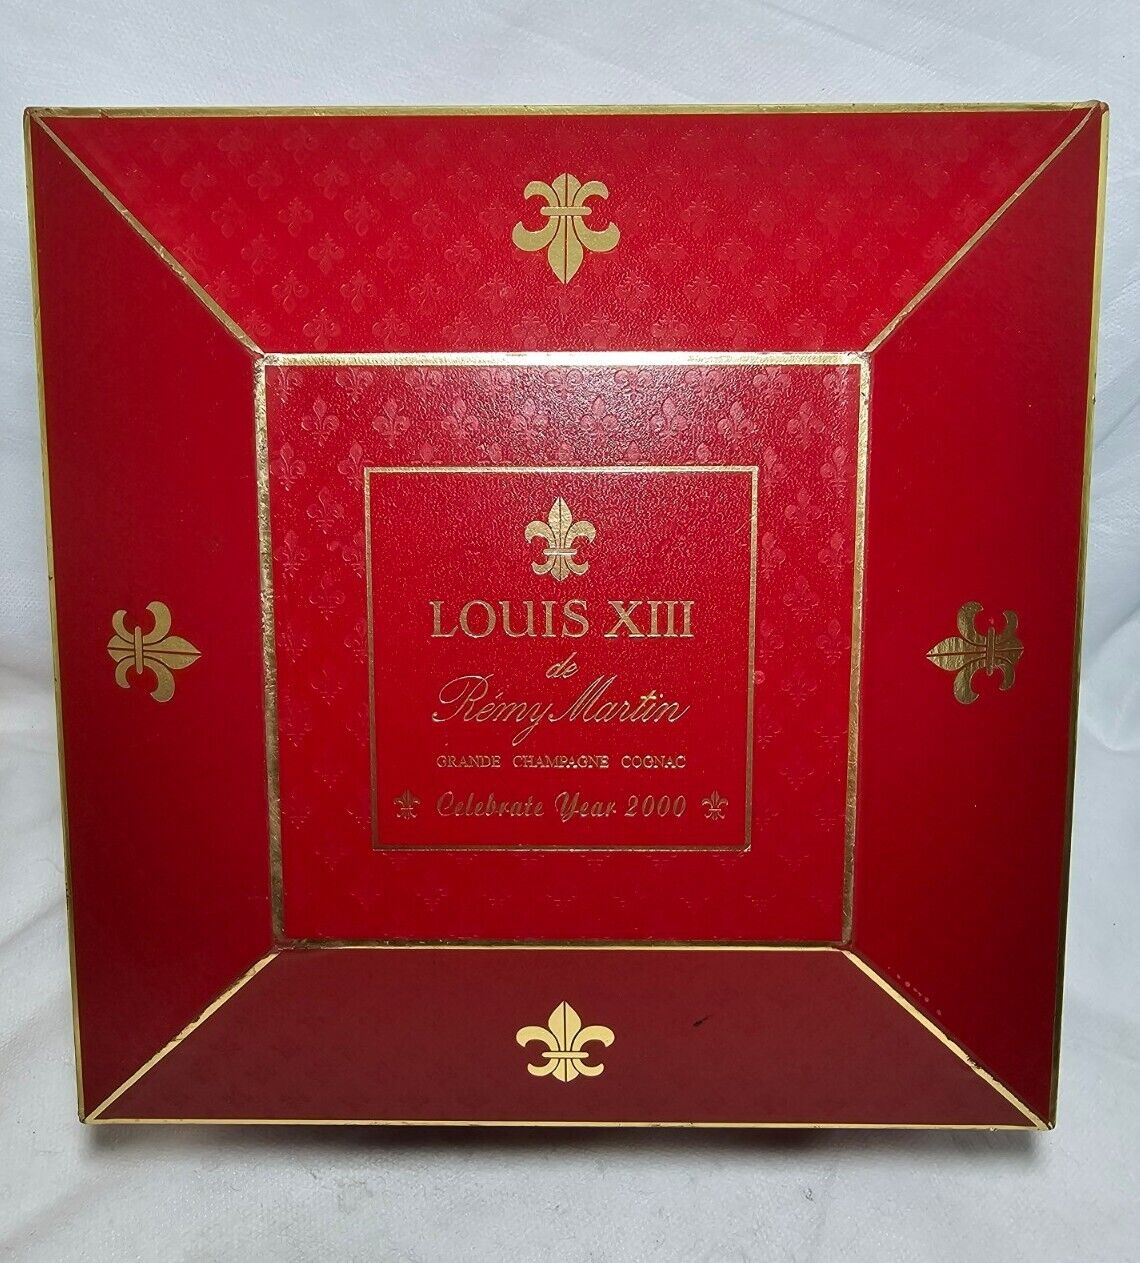 Remy Martin Louis xiii 13 Cognac Year 2000 Baccarat Millennium Edition Box Only